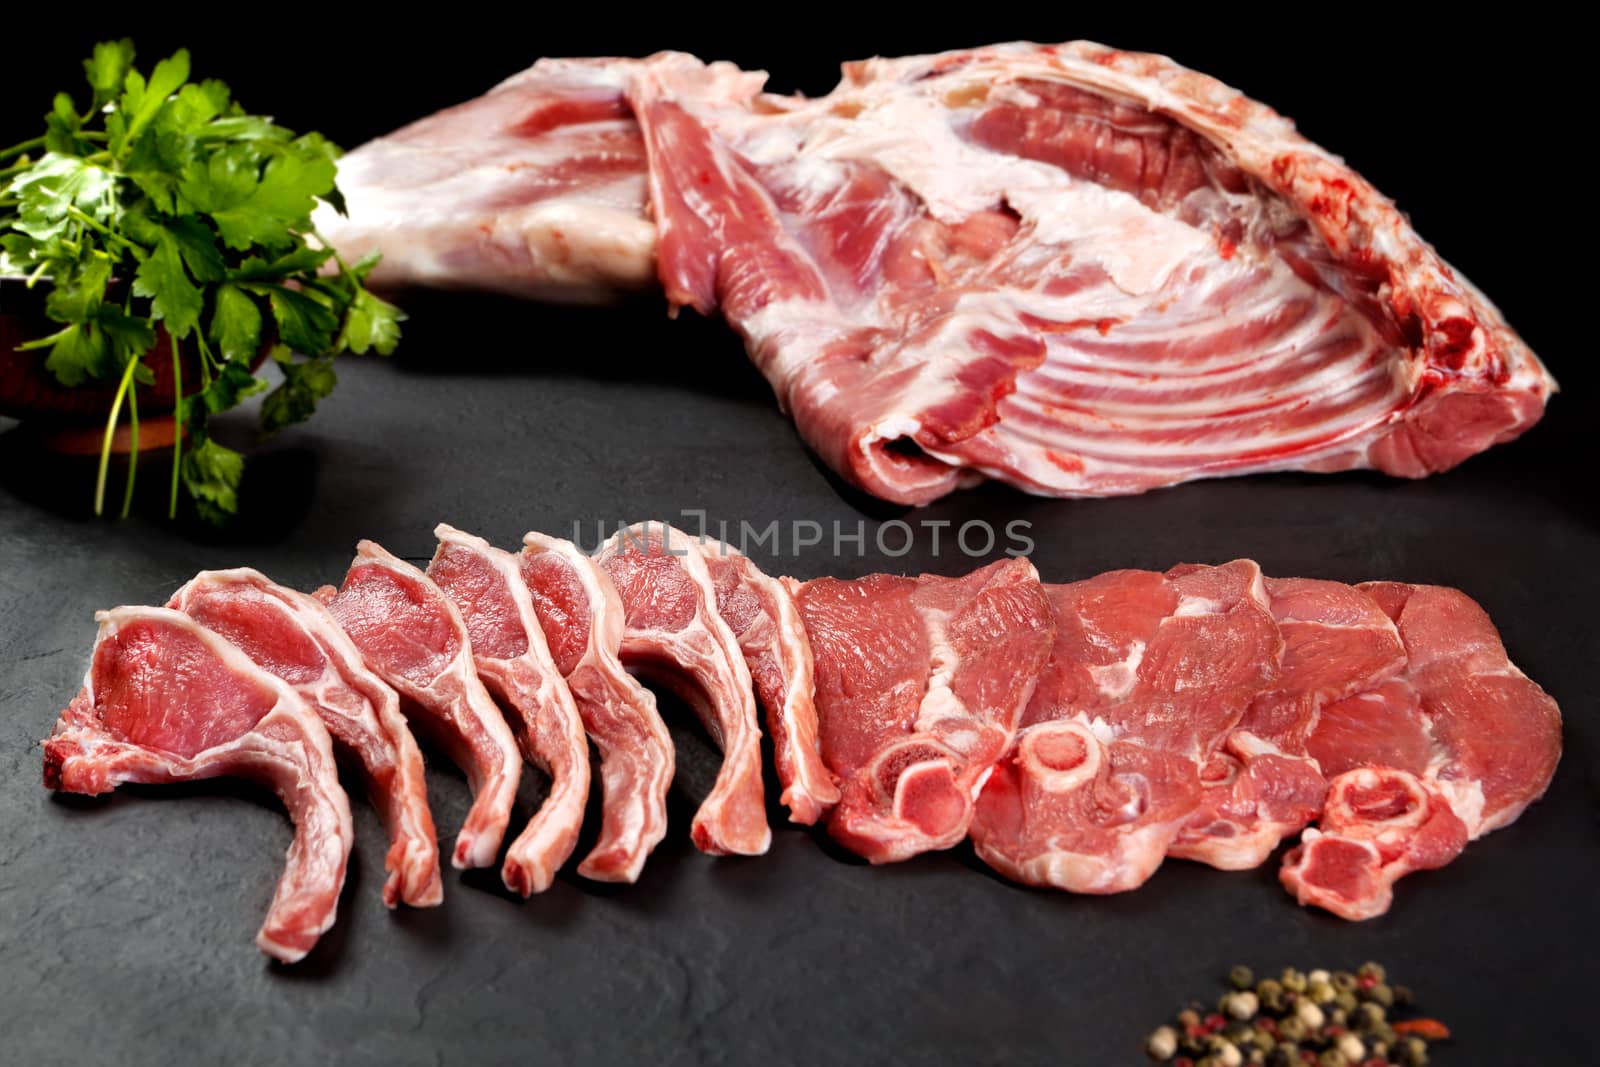 Fresh and raw meat. Ribs and pork chops uncooked, ready to grill and barbecue. Food